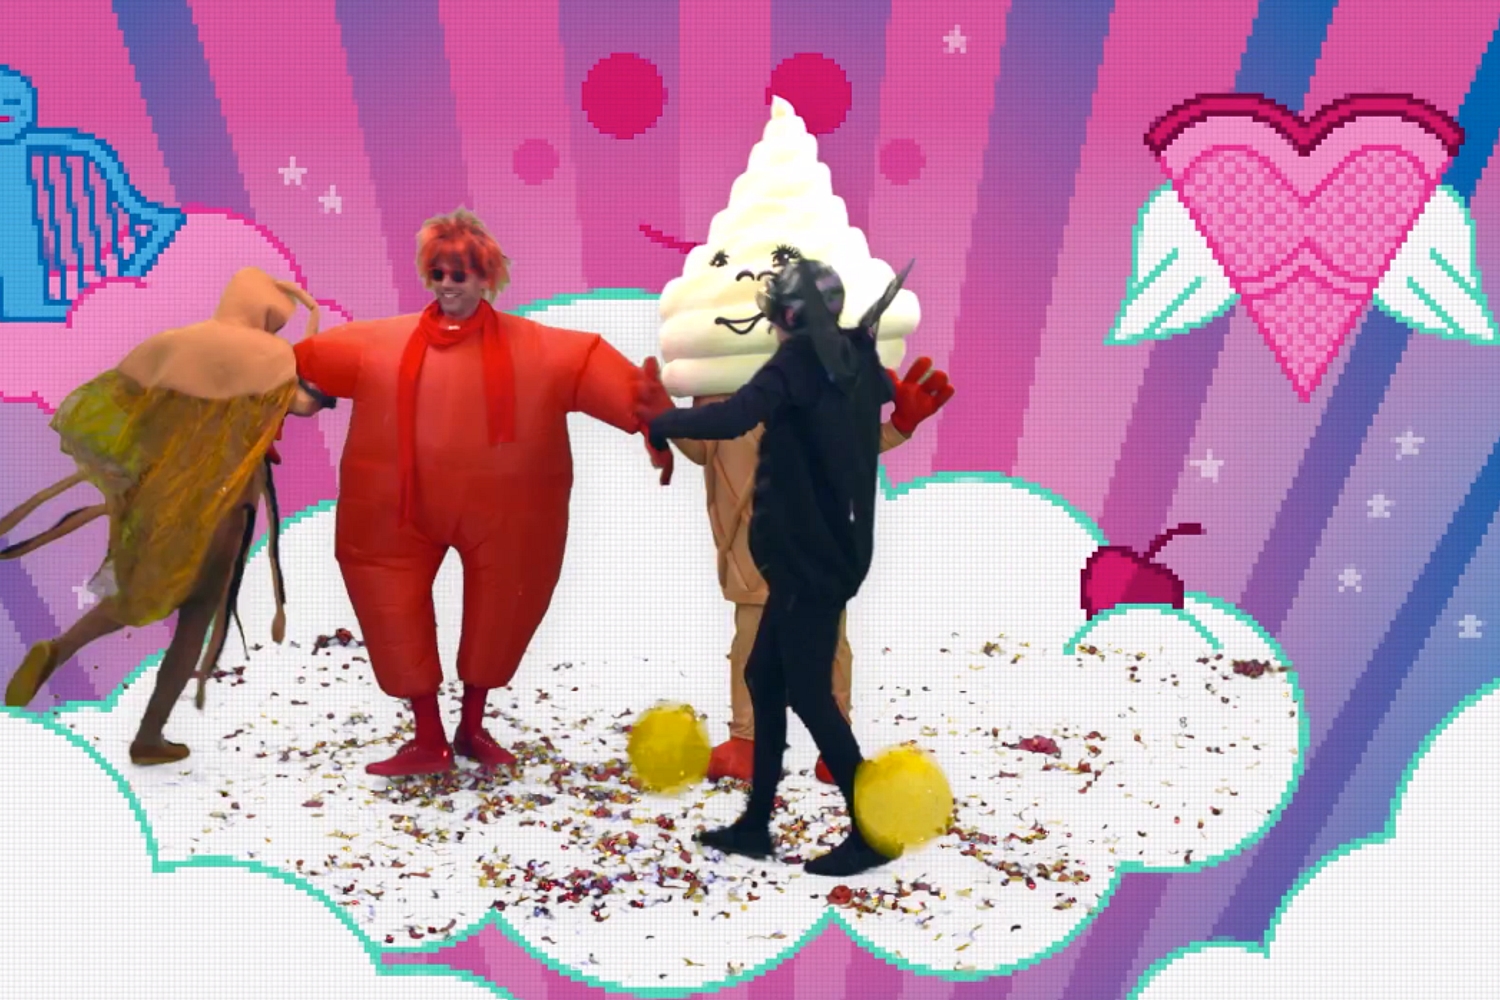 Watch Blur dress up as ice creams in ‘Ong Ong’ video